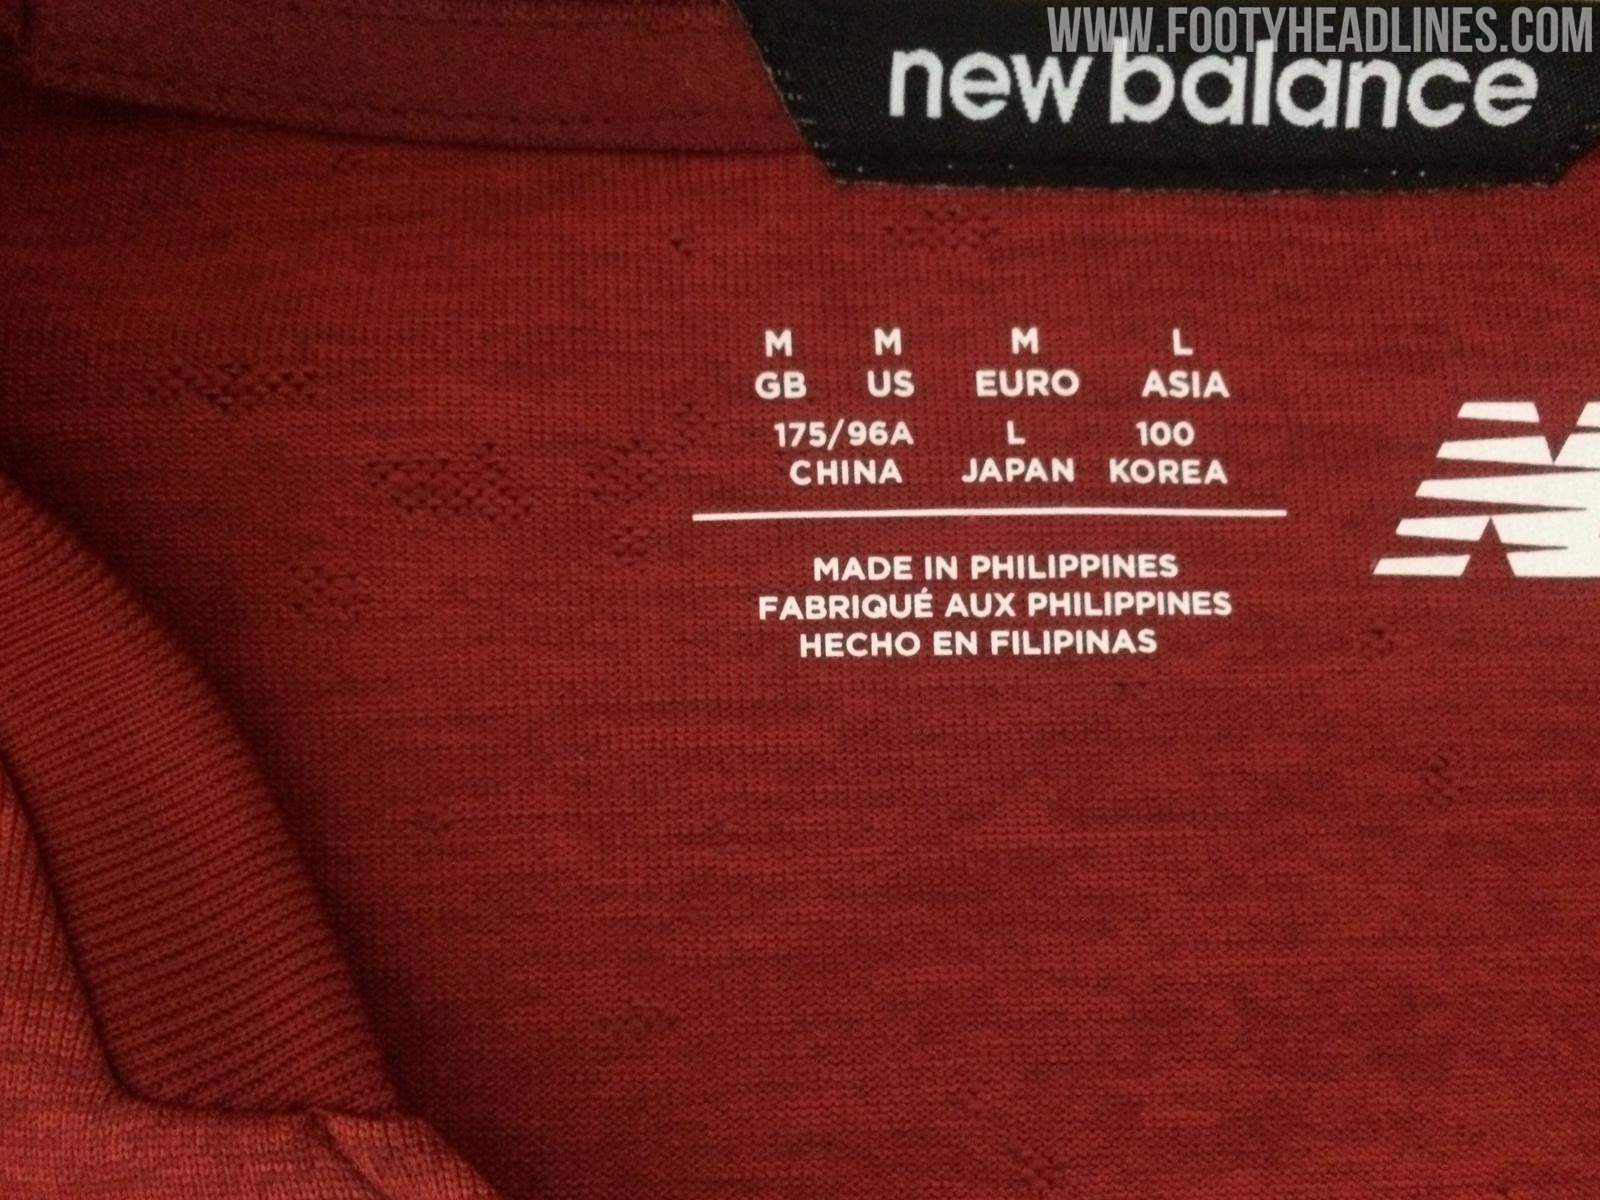 Leaked New Balance Liverpool 20-21 Home, Away & Third Kits - To be Never  Released Due to Nike Deal - Footy Headlines